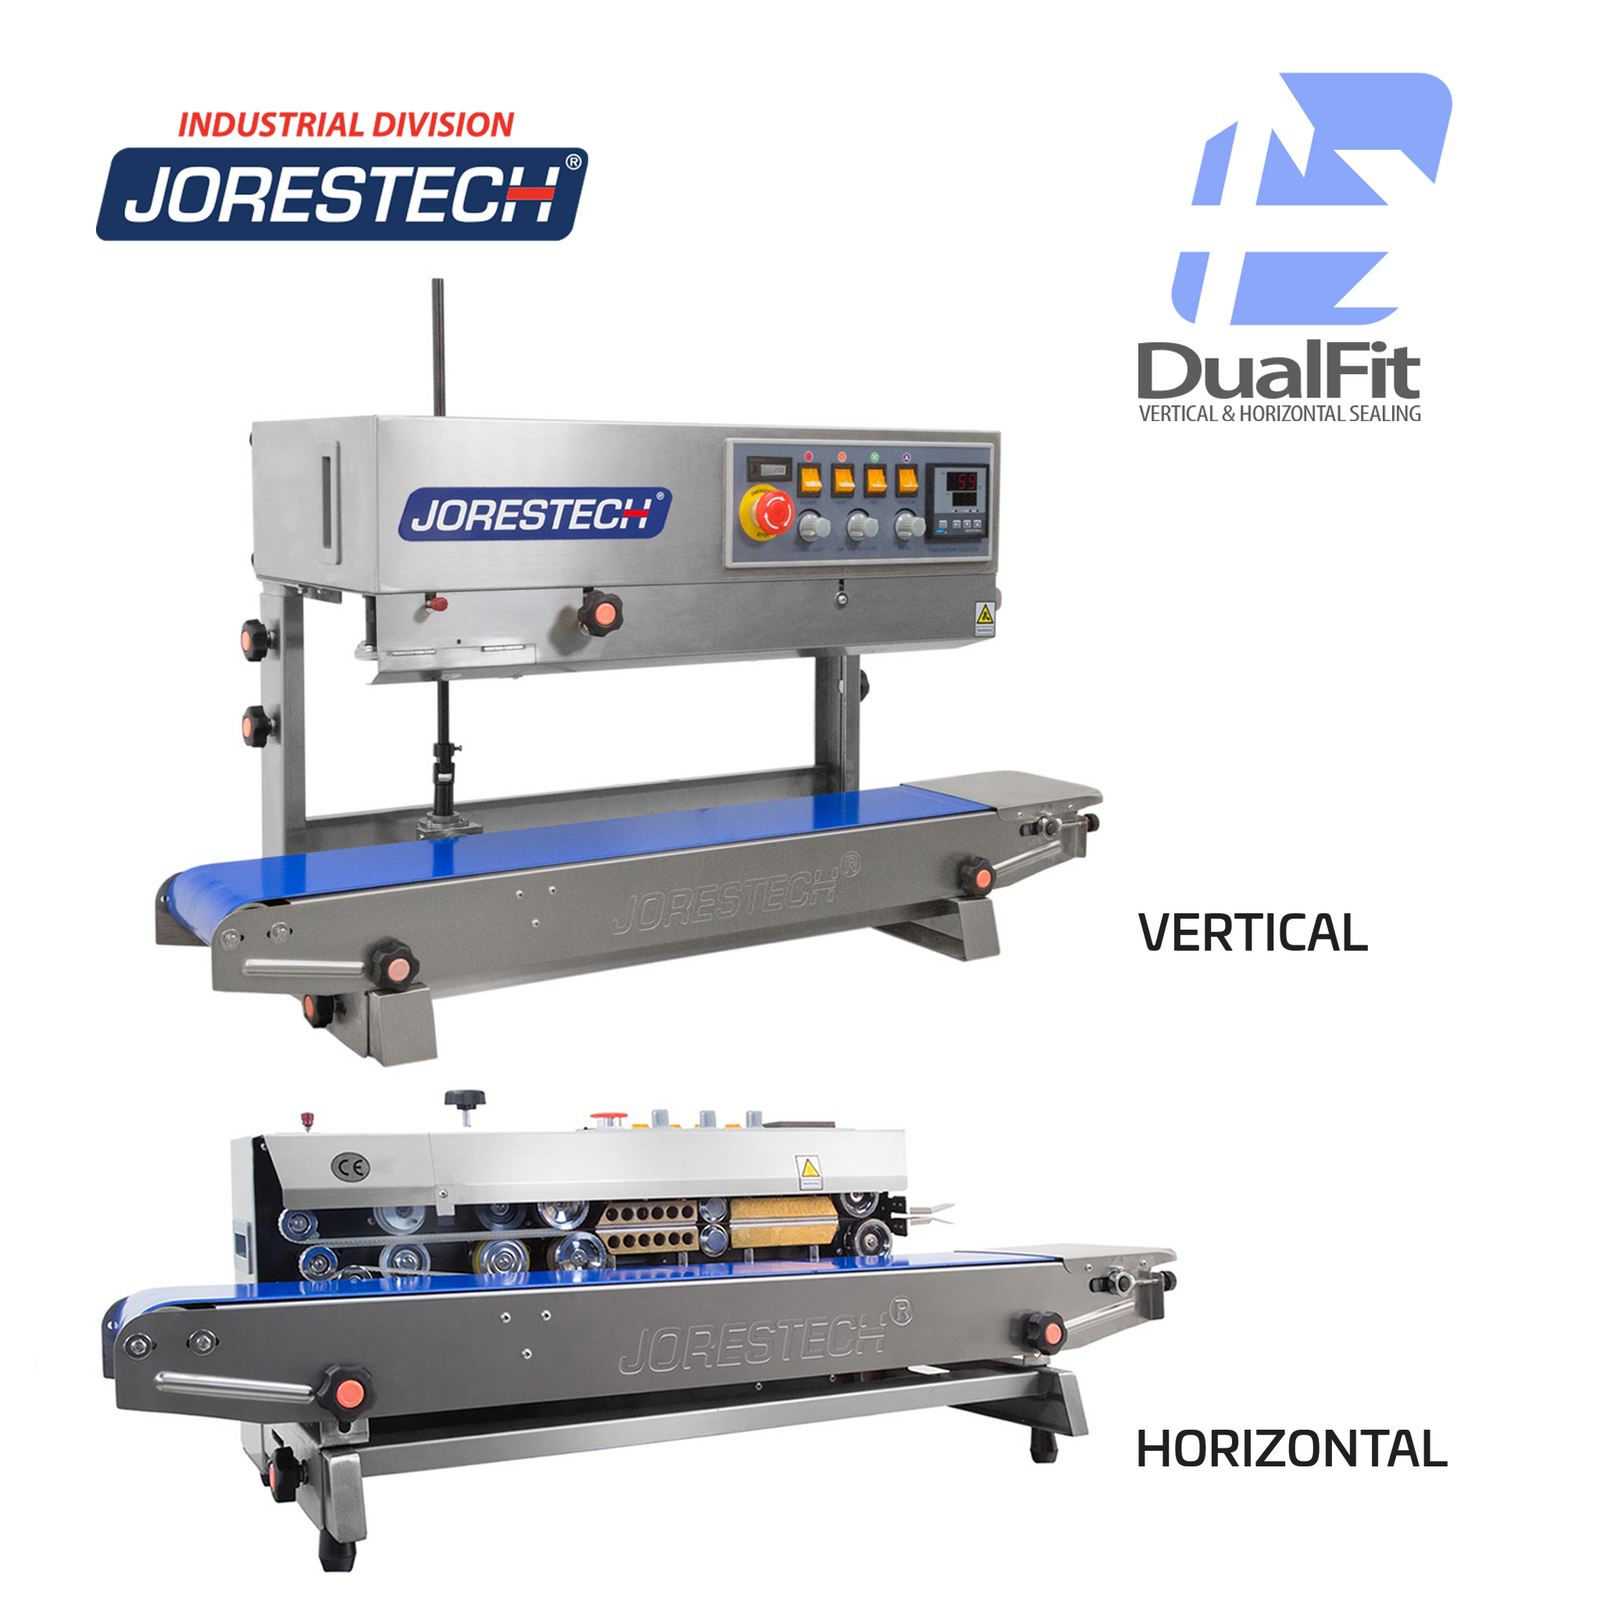 220v stainless steel JORES TECHNOLOGIES® continuous band sealer for vertical and horizontal applications. . Dual fit logo with arrows indicate that this table top bag sealer can be used for vertical and for horizontal applications. 